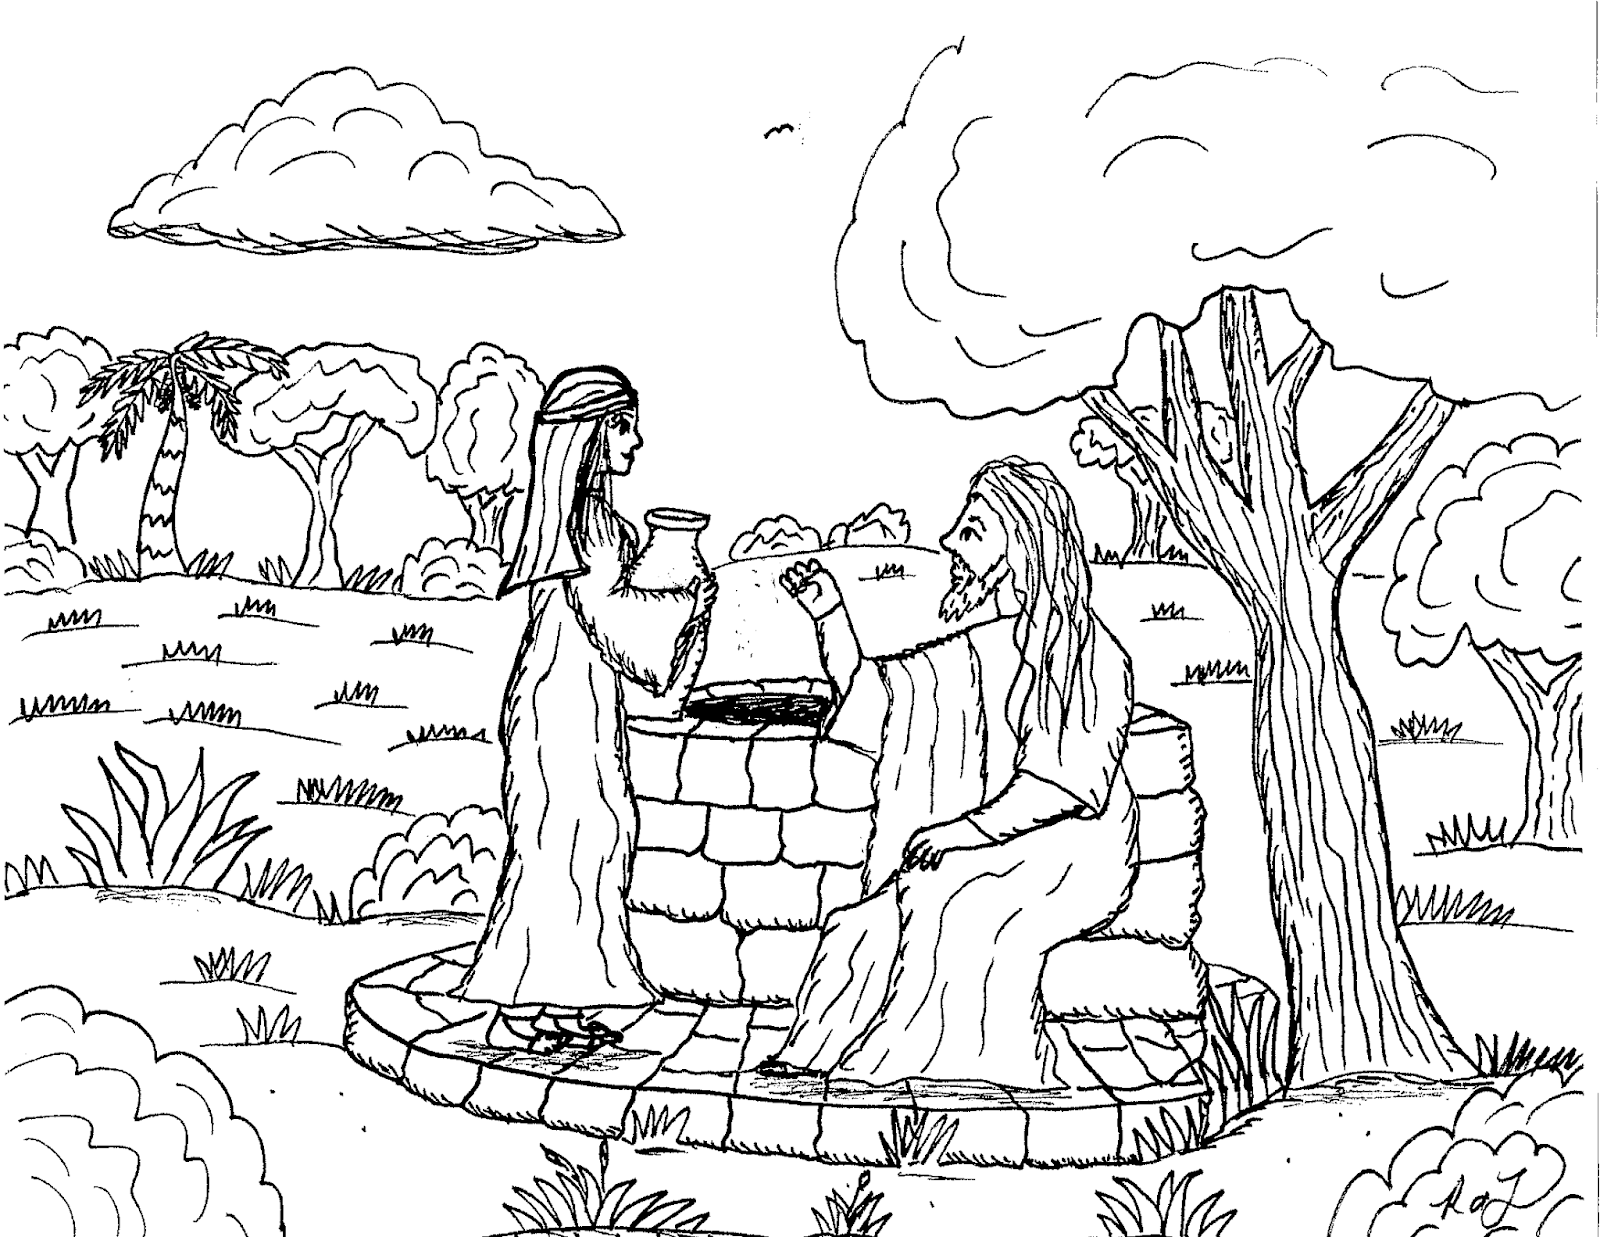 Robin's Great Coloring Pages: Woman at the Well